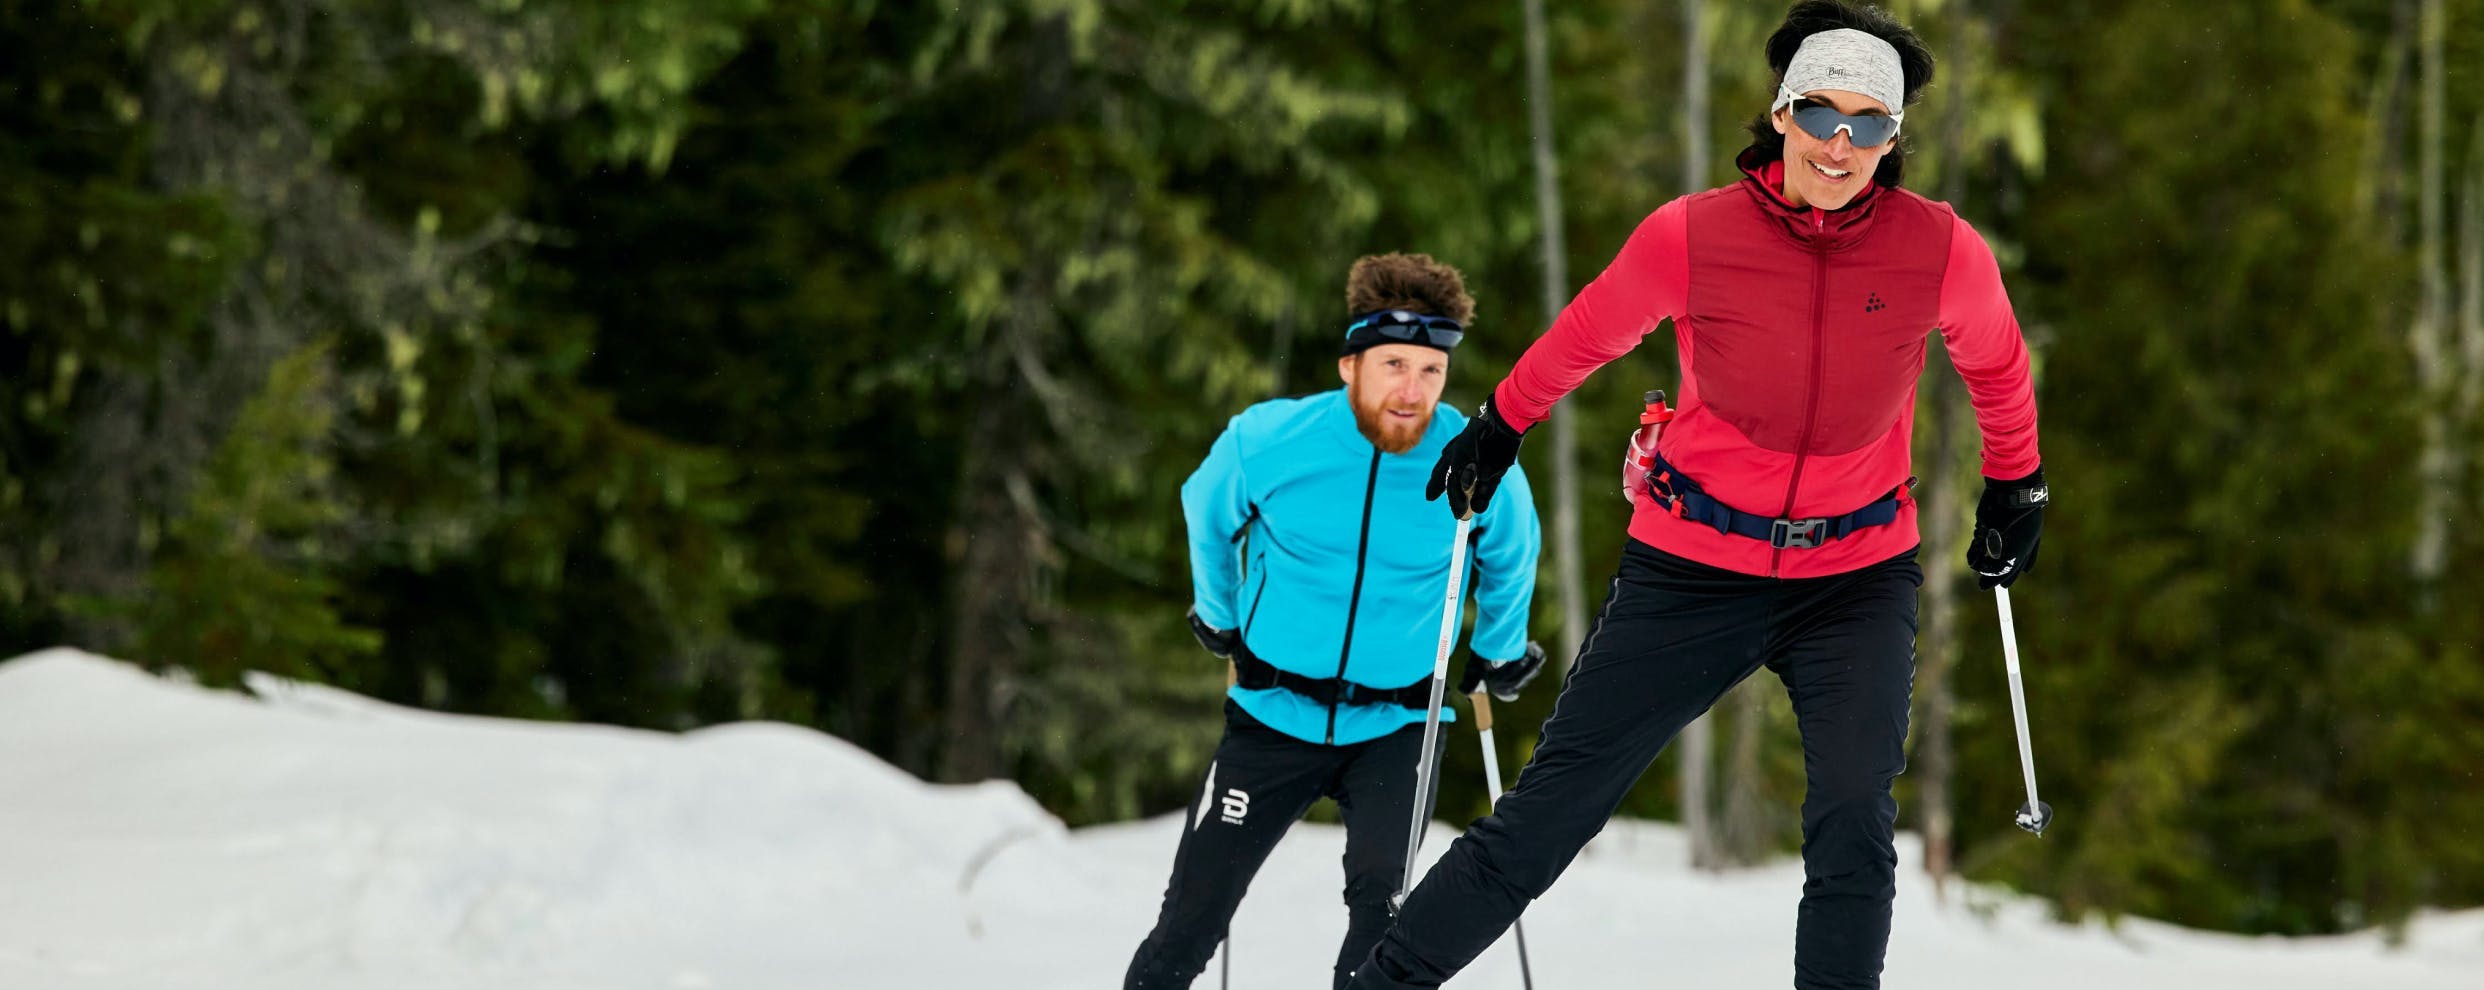 Cross-country ski season is here. Shop boots, wax and more for trails and corduroy.